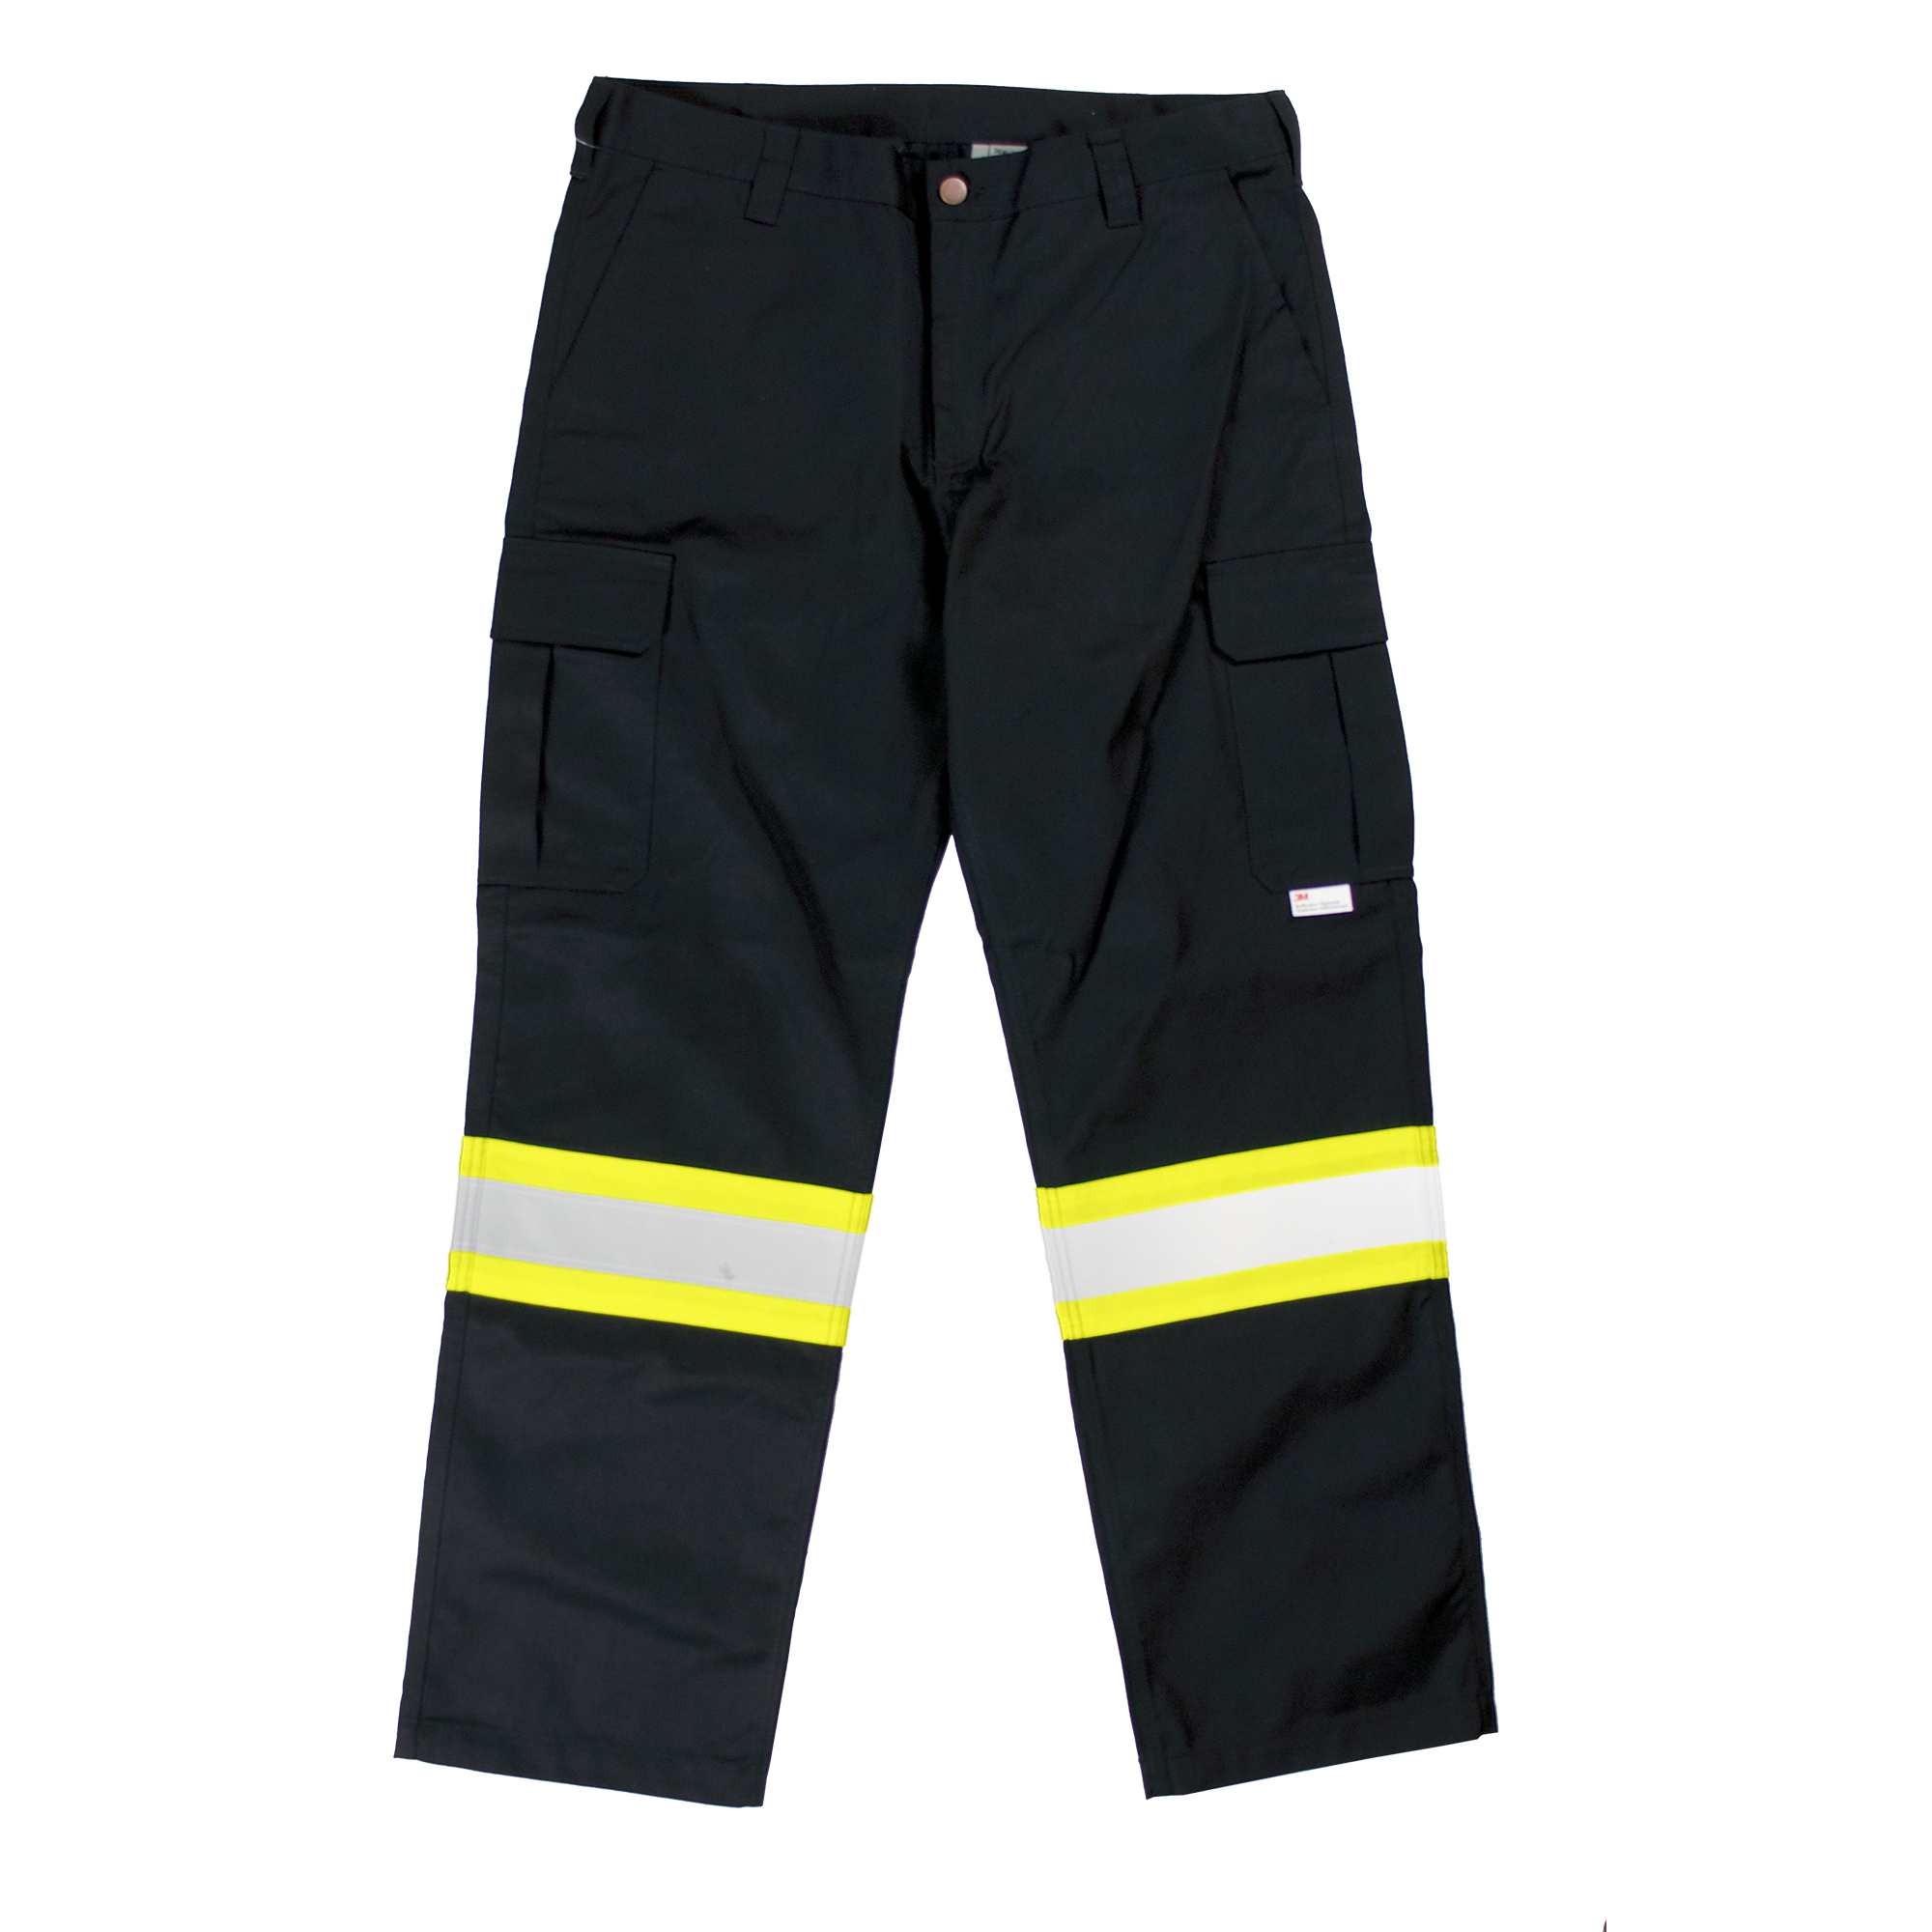 Tough Duck, Safety Cargo Utility Pant, Waist 30 in, Inseam 32 in, Color Black, Model S60711